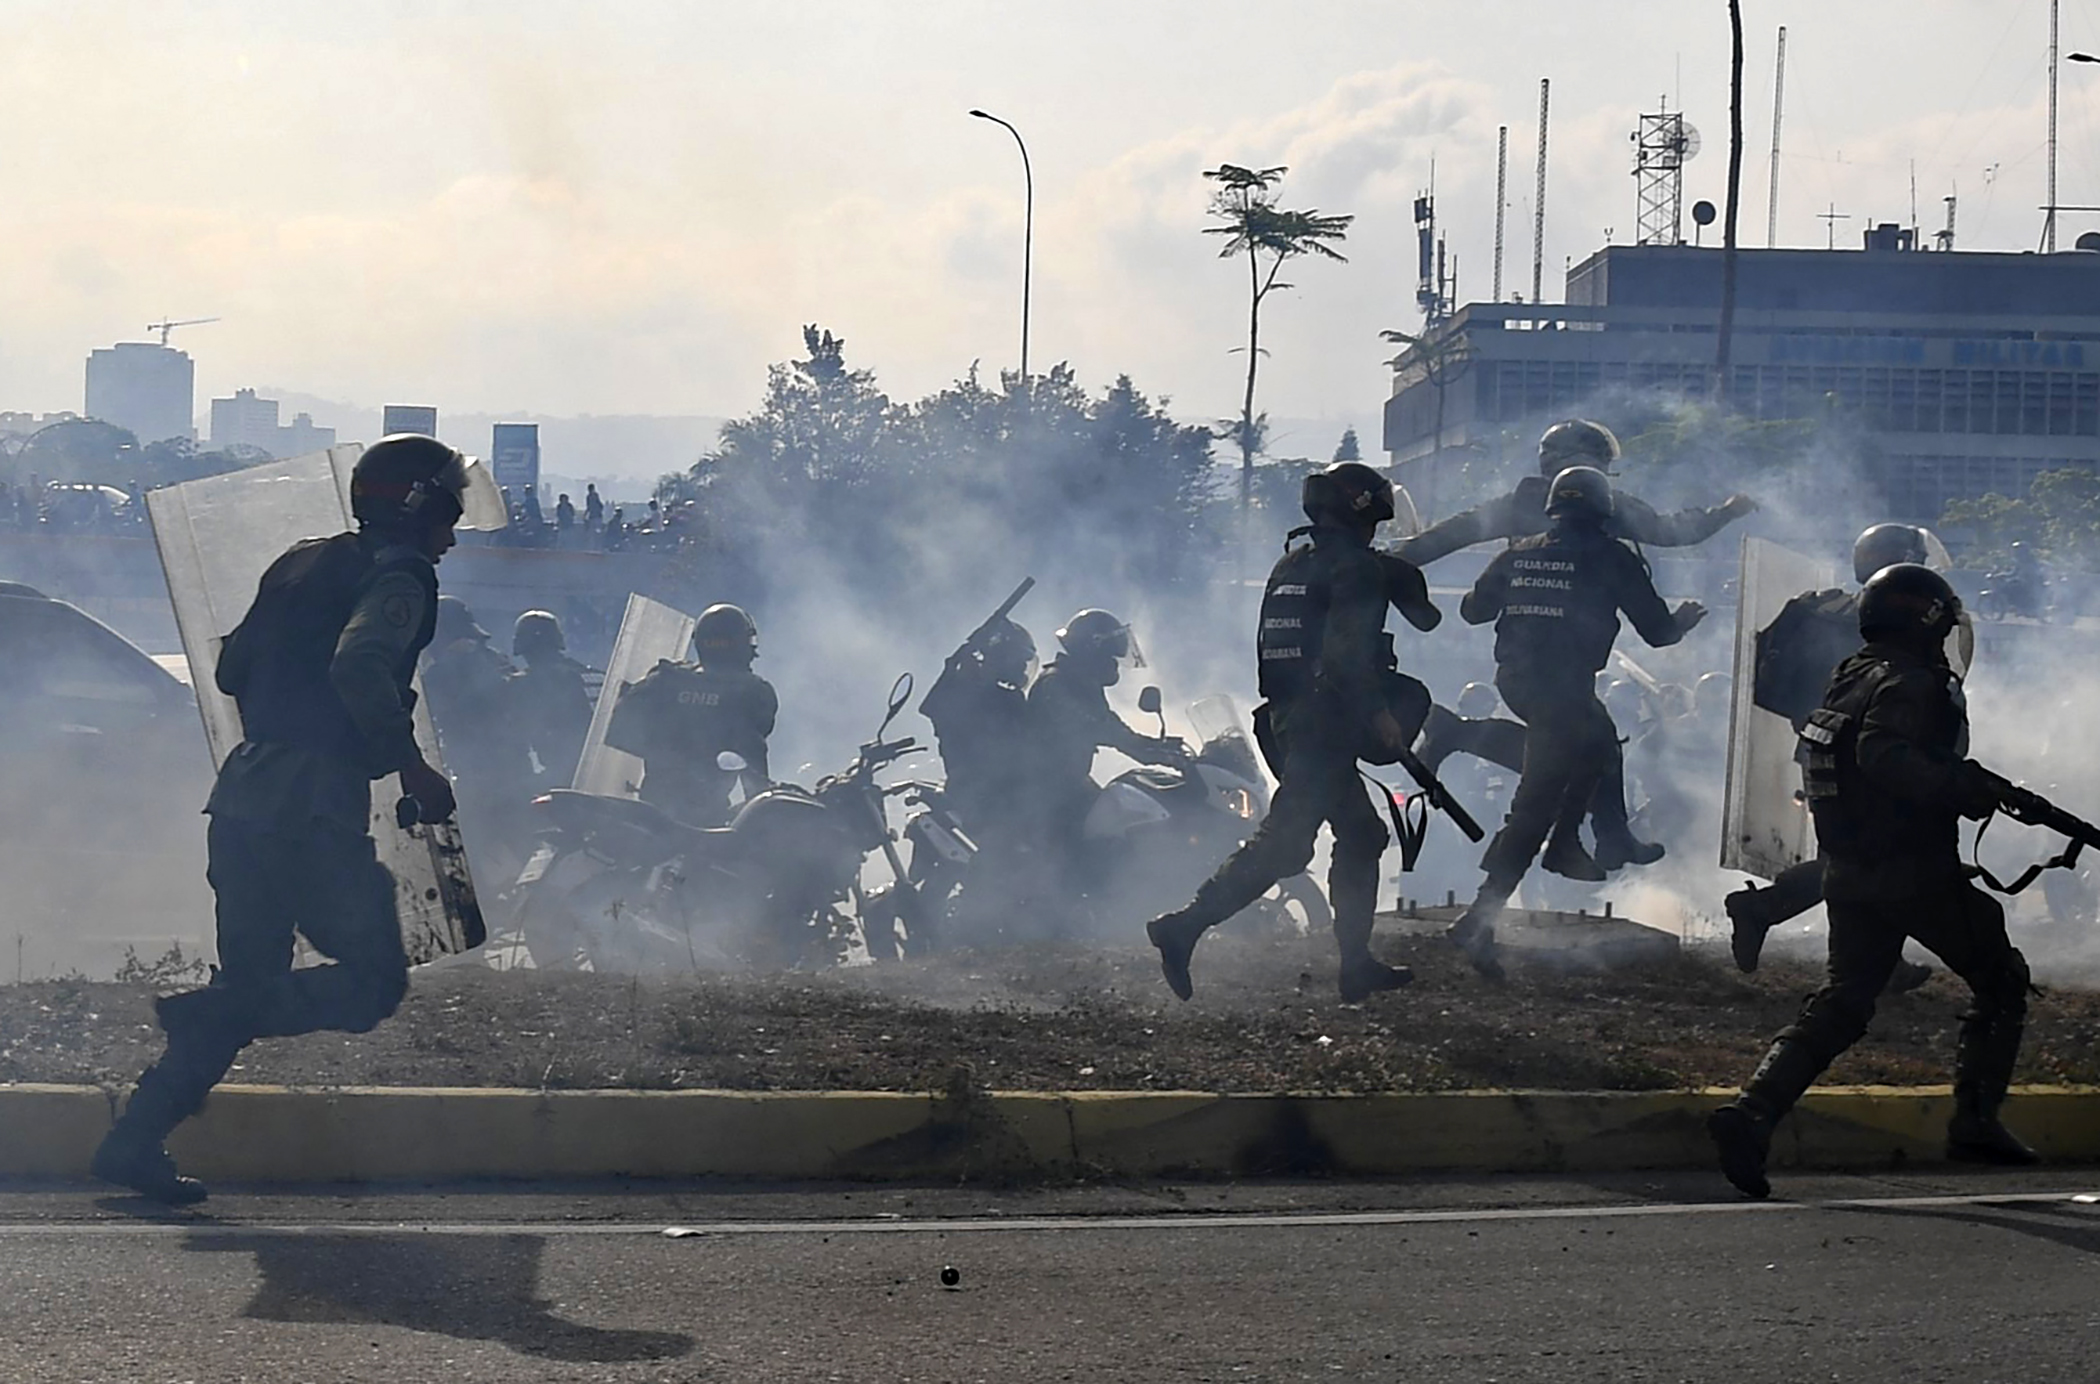 PHOTO: Members of the Bolivarian National Guard loyal to Venezuelan President Nicolas Maduro run under a cloud of tear gas after being repelled with rifle fire by guards supporting Venezuelan opposition leader Juan Guaido in Caracas, April 30, 2019. 